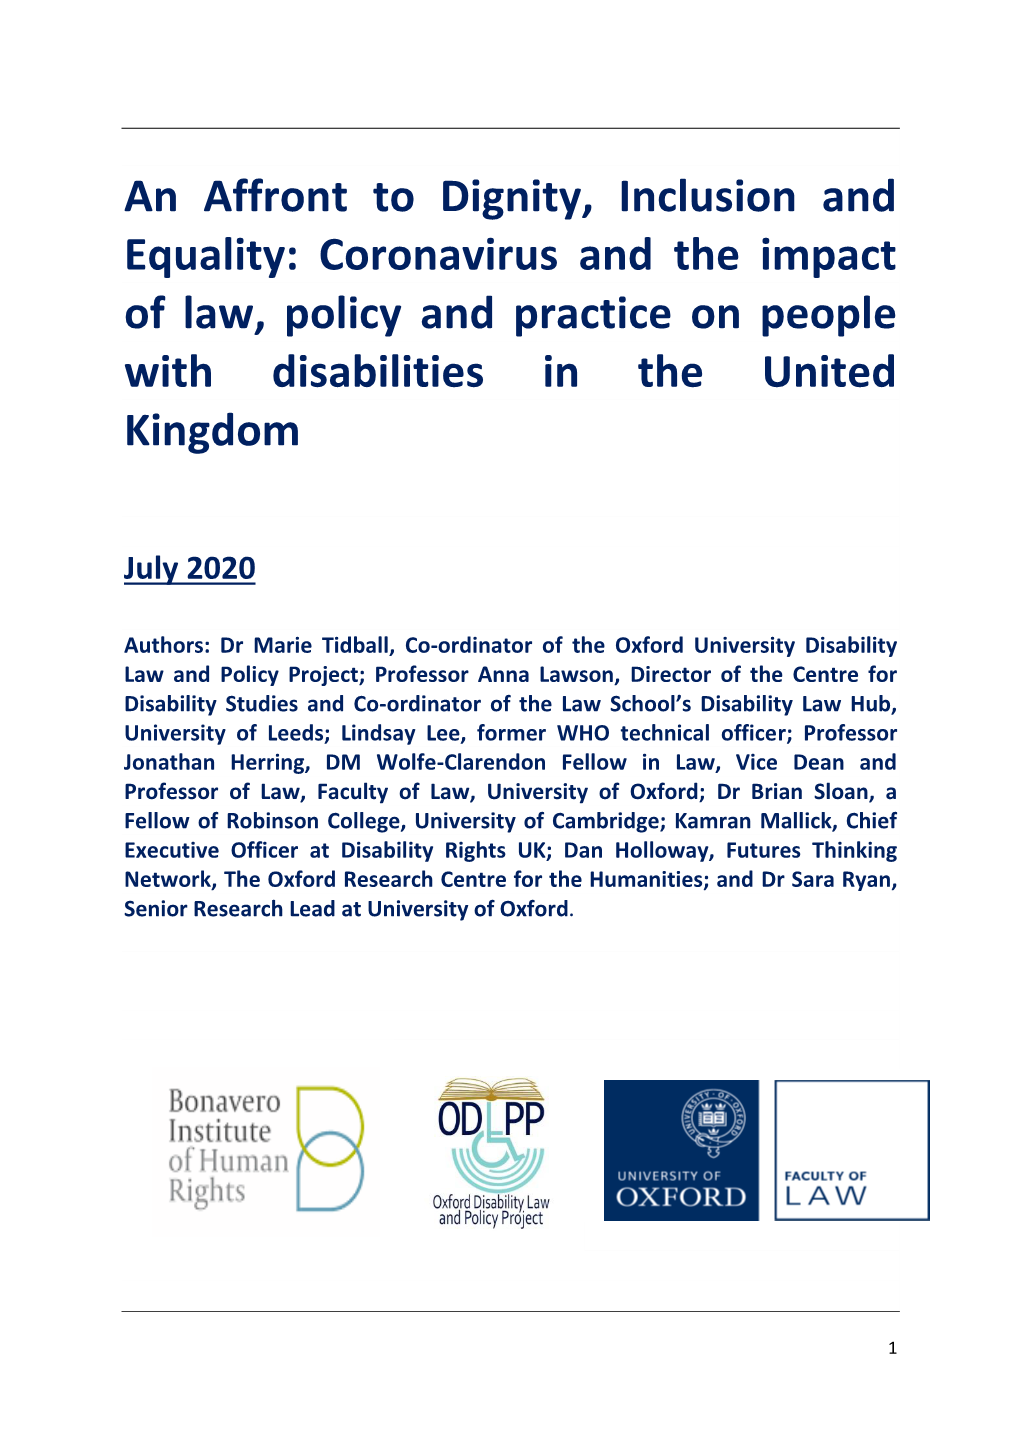 An Affront to Dignity, Inclusion and Equality: Coronavirus and the Impact of Law, Policy and Practice on People with Disabilities in the United Kingdom